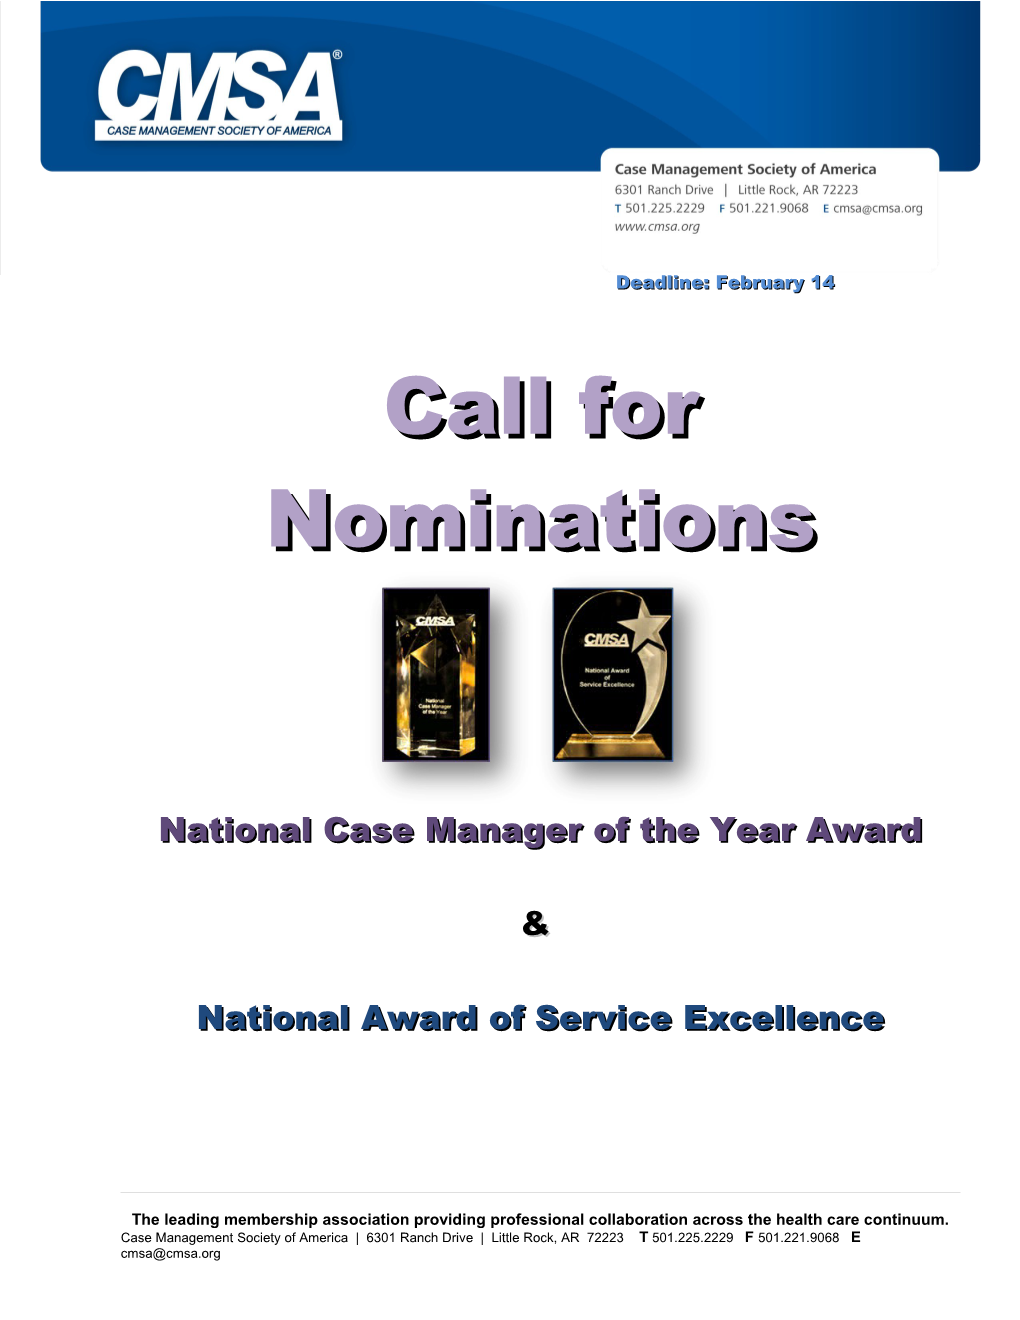 National Case Manager of the Year Award